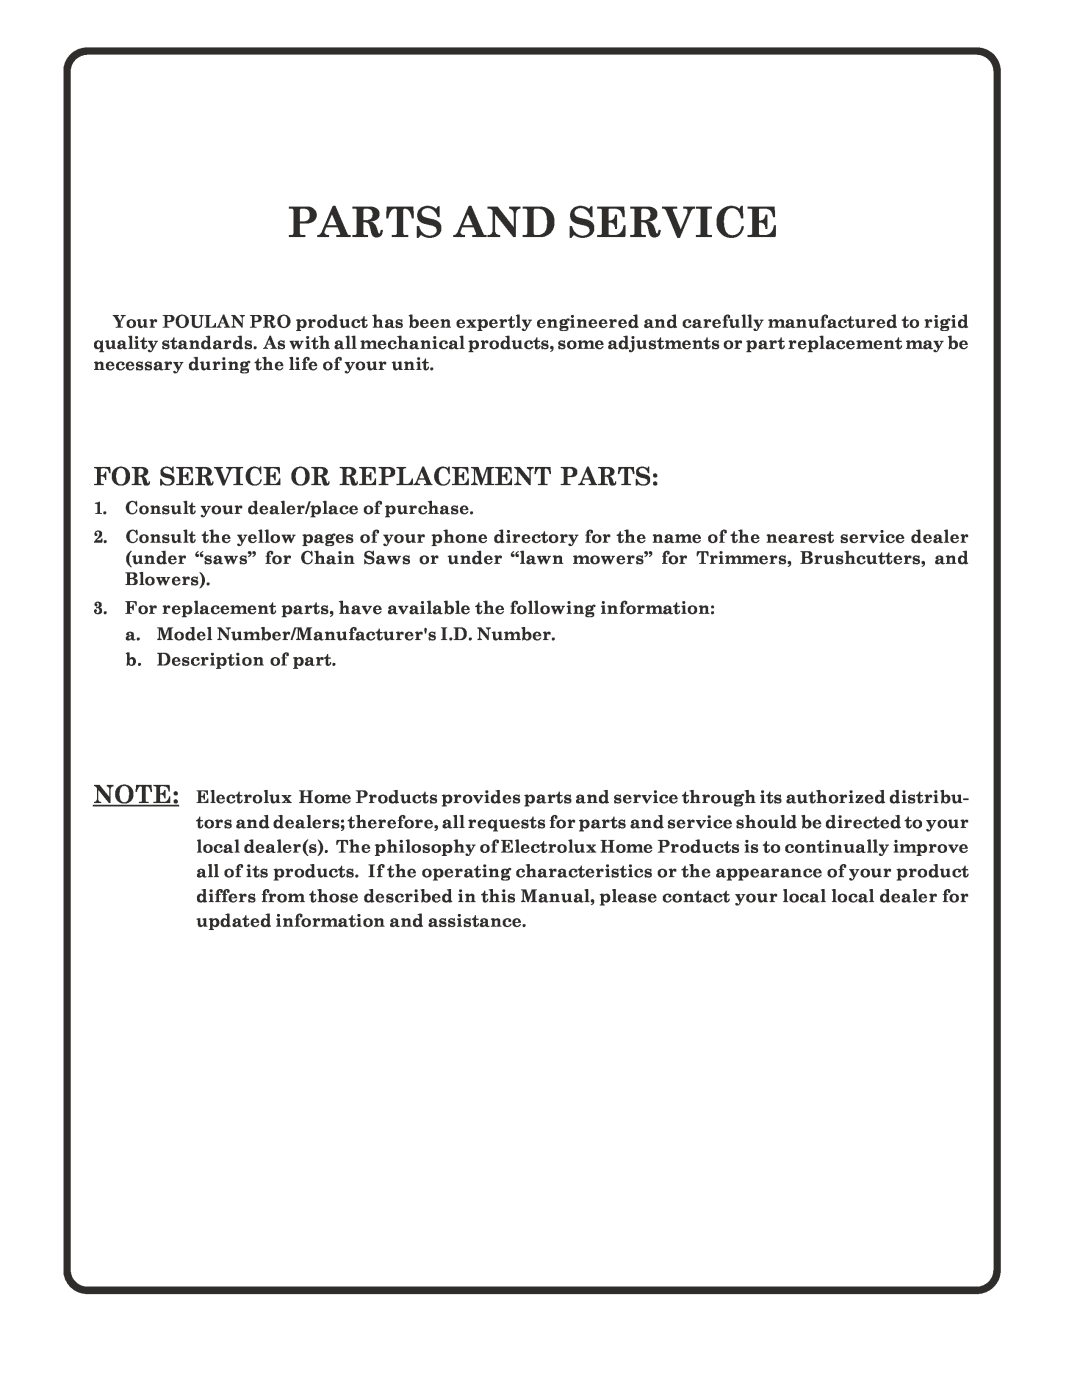 Poulan PR185H42STG owner manual Parts And Service, For Service Or Replacement Parts 